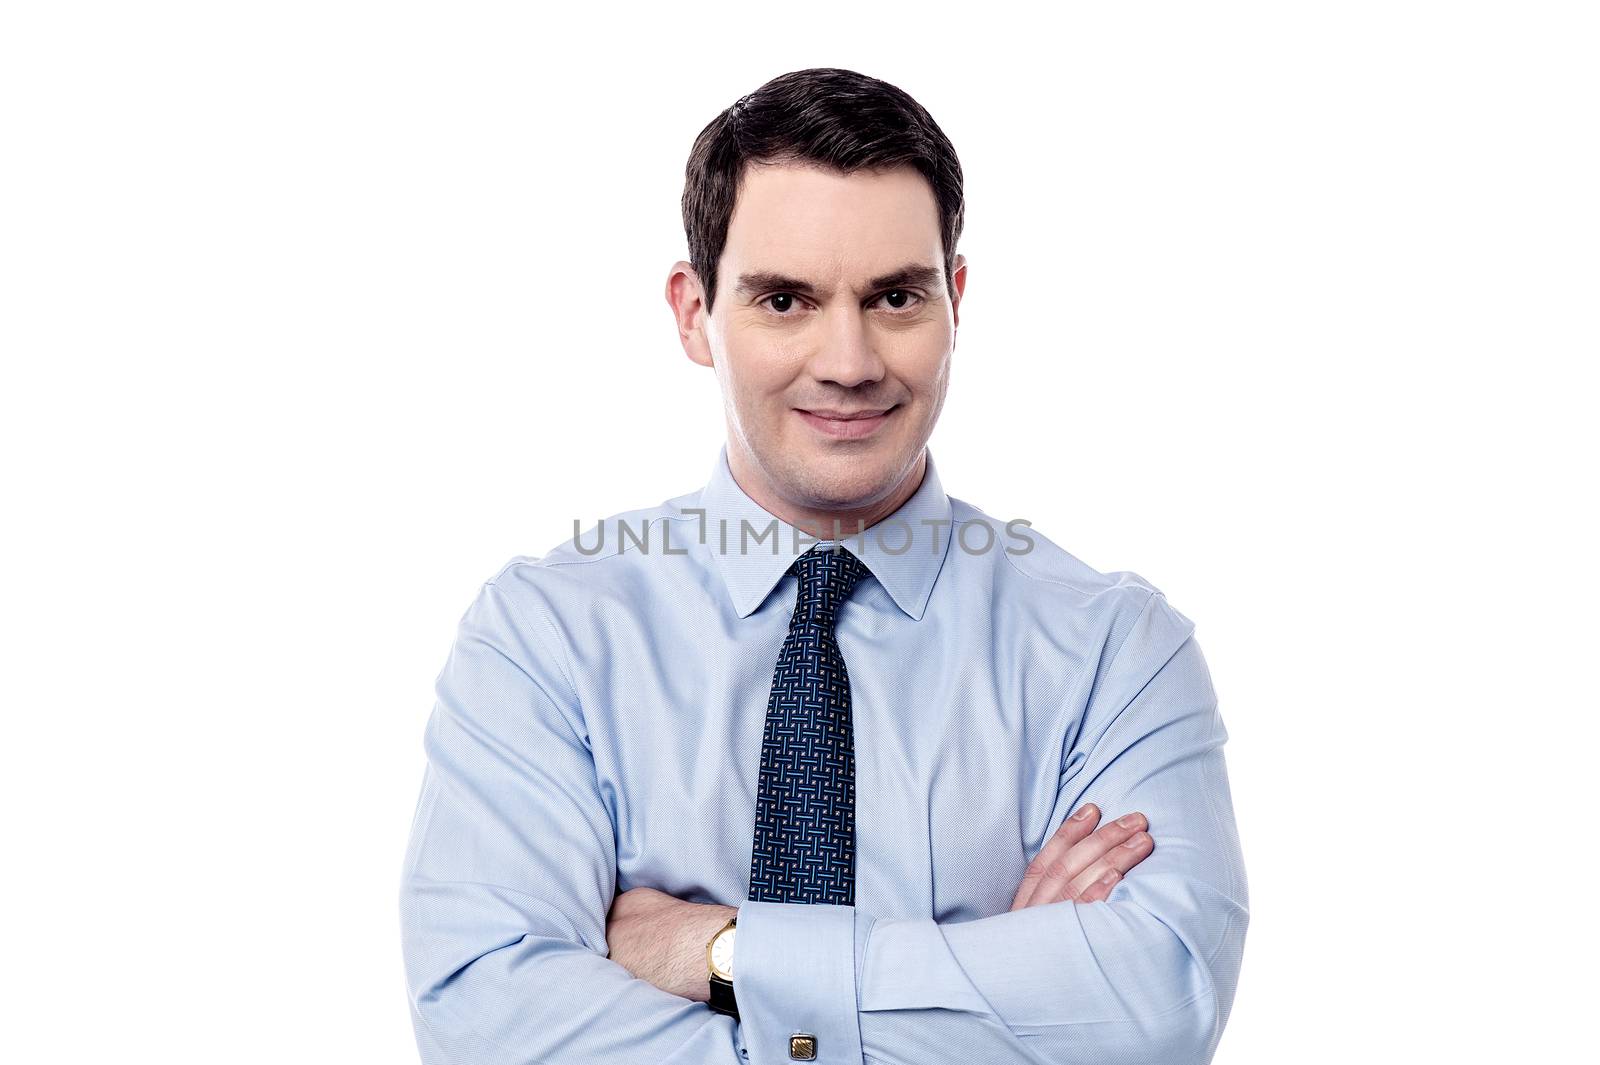 Handsome male executive posing with confidence over white